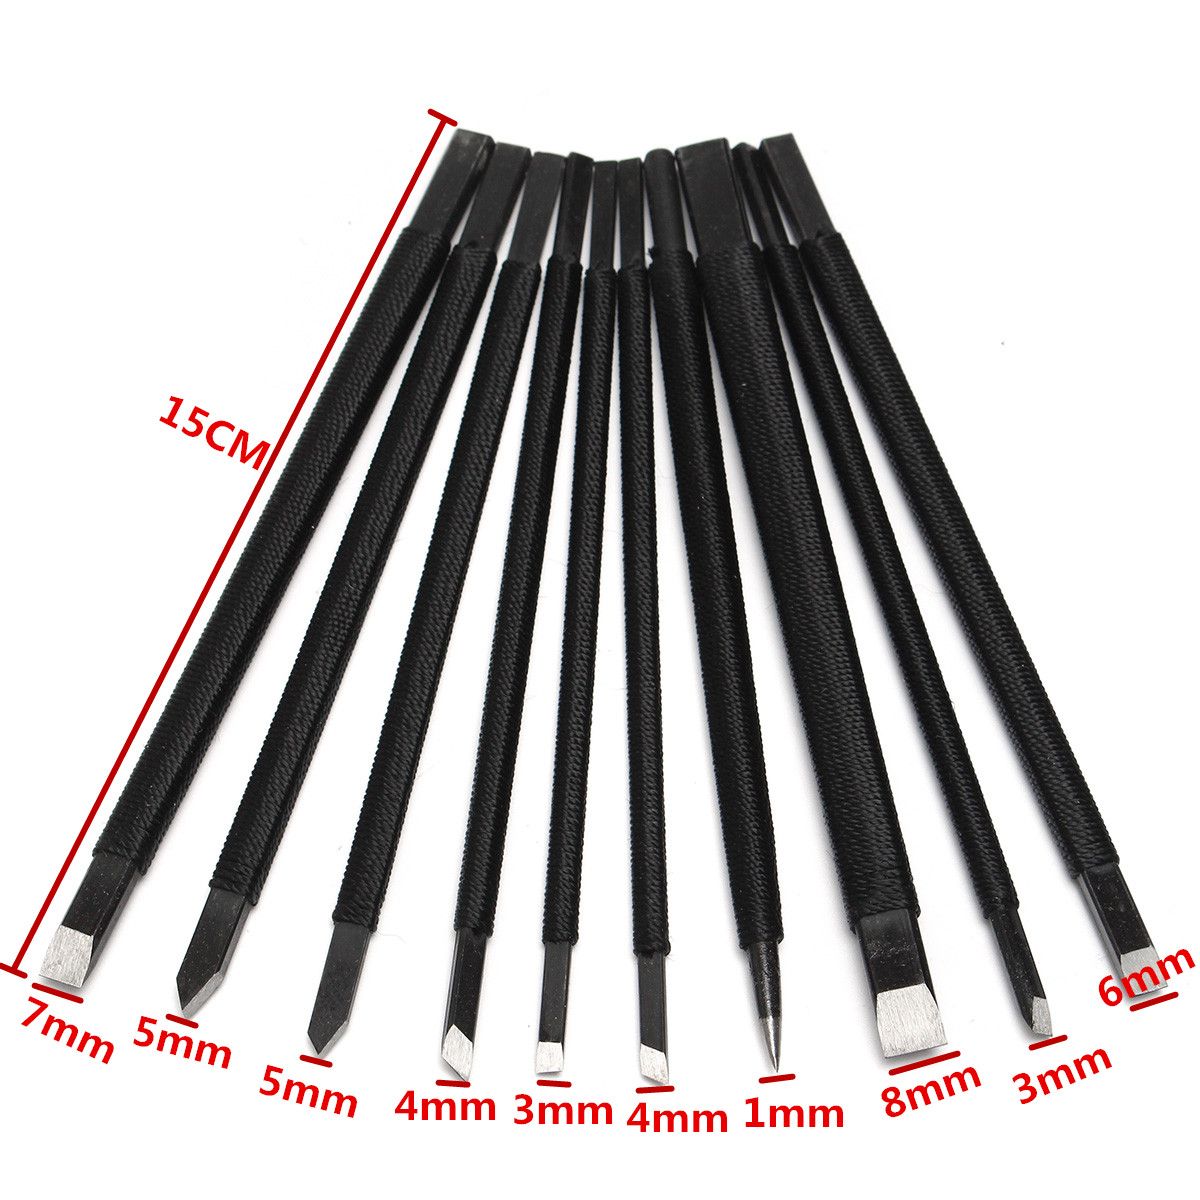 10Pcs-Steel-Chisel-Set-Stone-Wood-Carving-Artist-Woodworkers-Tool-1170184